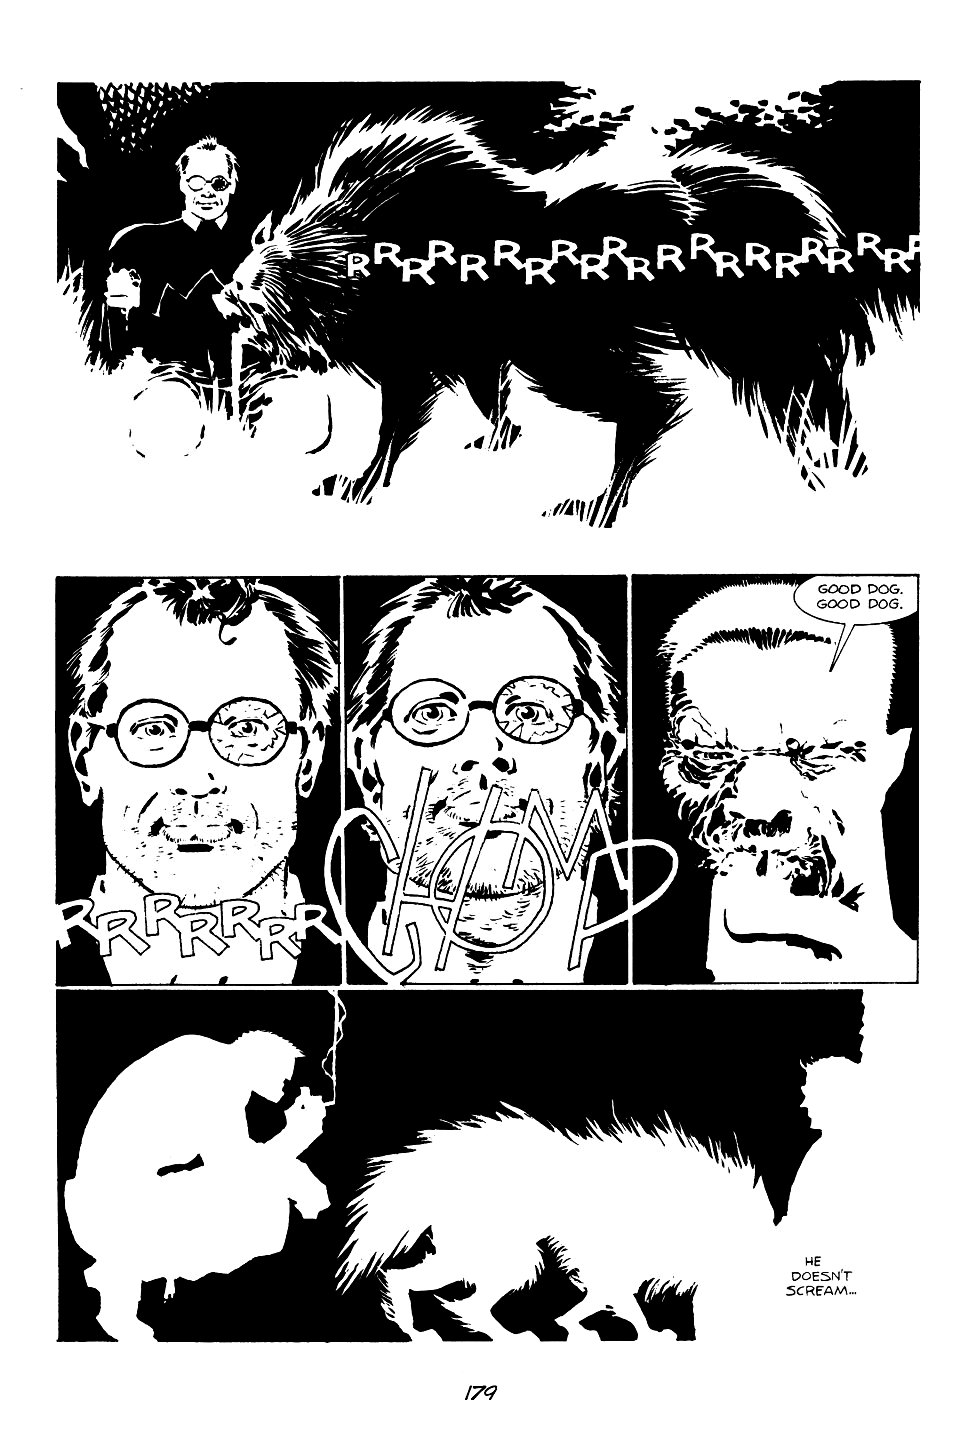 page 179 of sin city 1 the hard goodbye